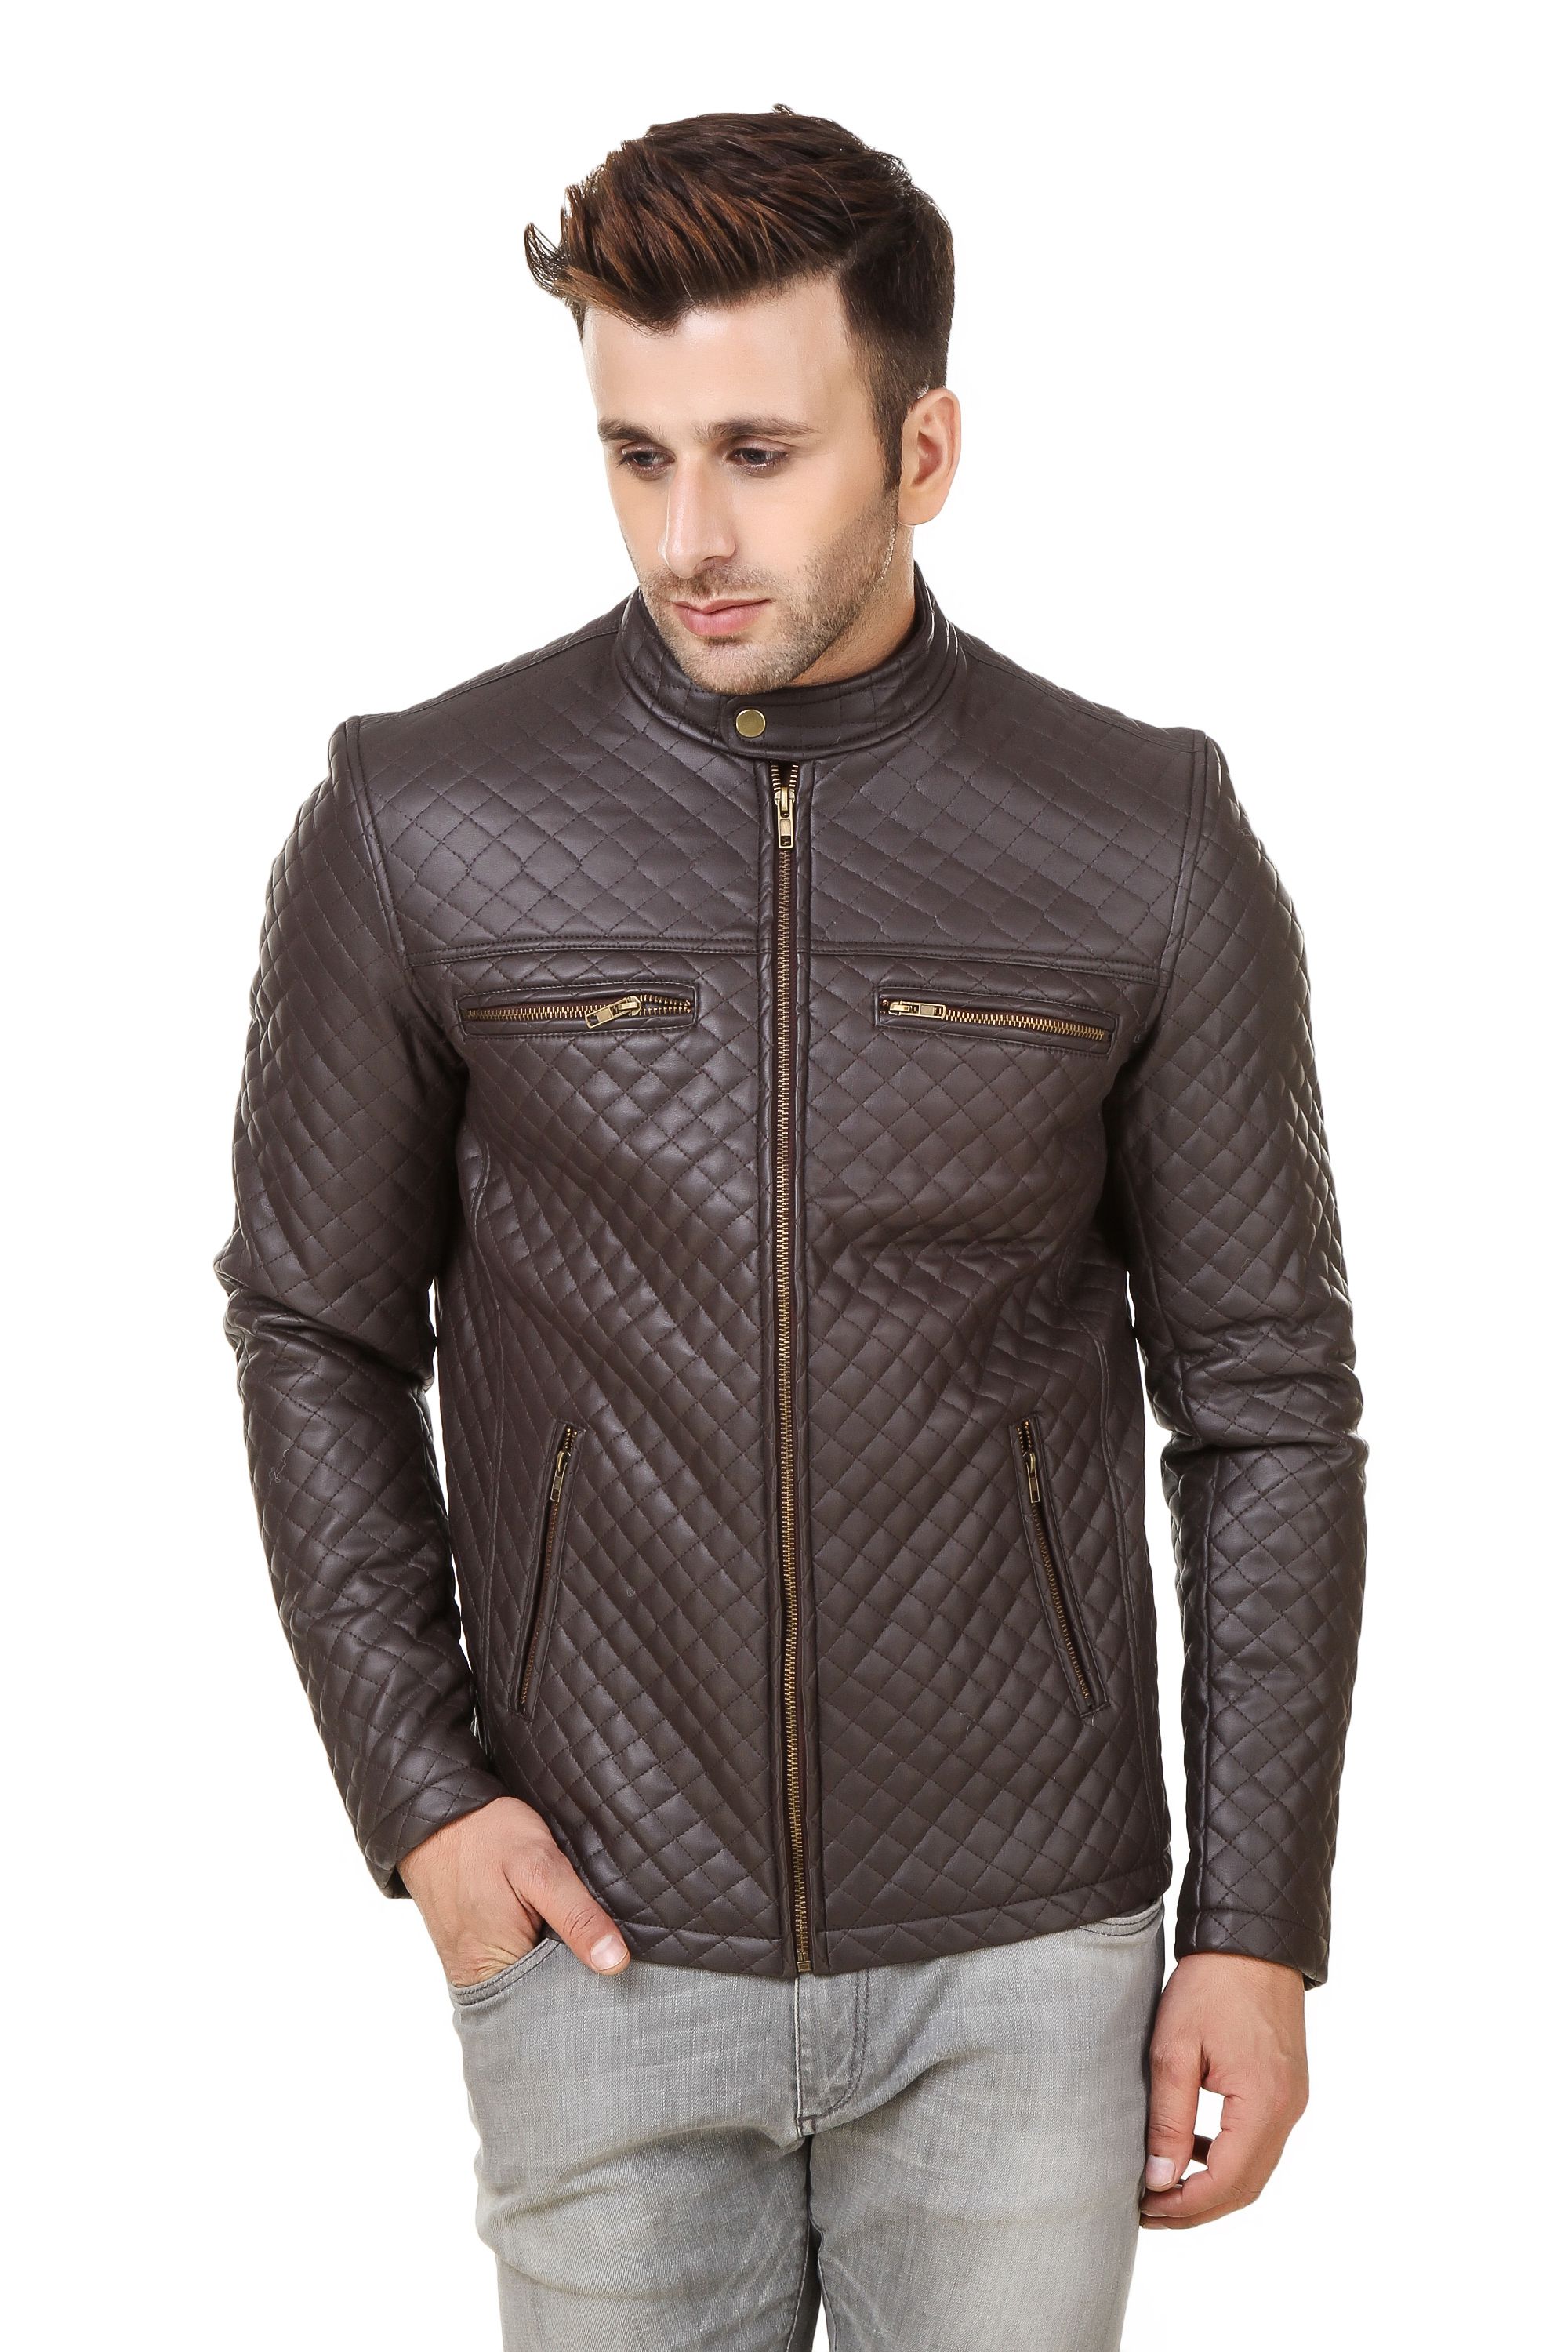 StyleHub Brown Quilted & Bomber Jacket - Buy StyleHub Brown Quilted ...